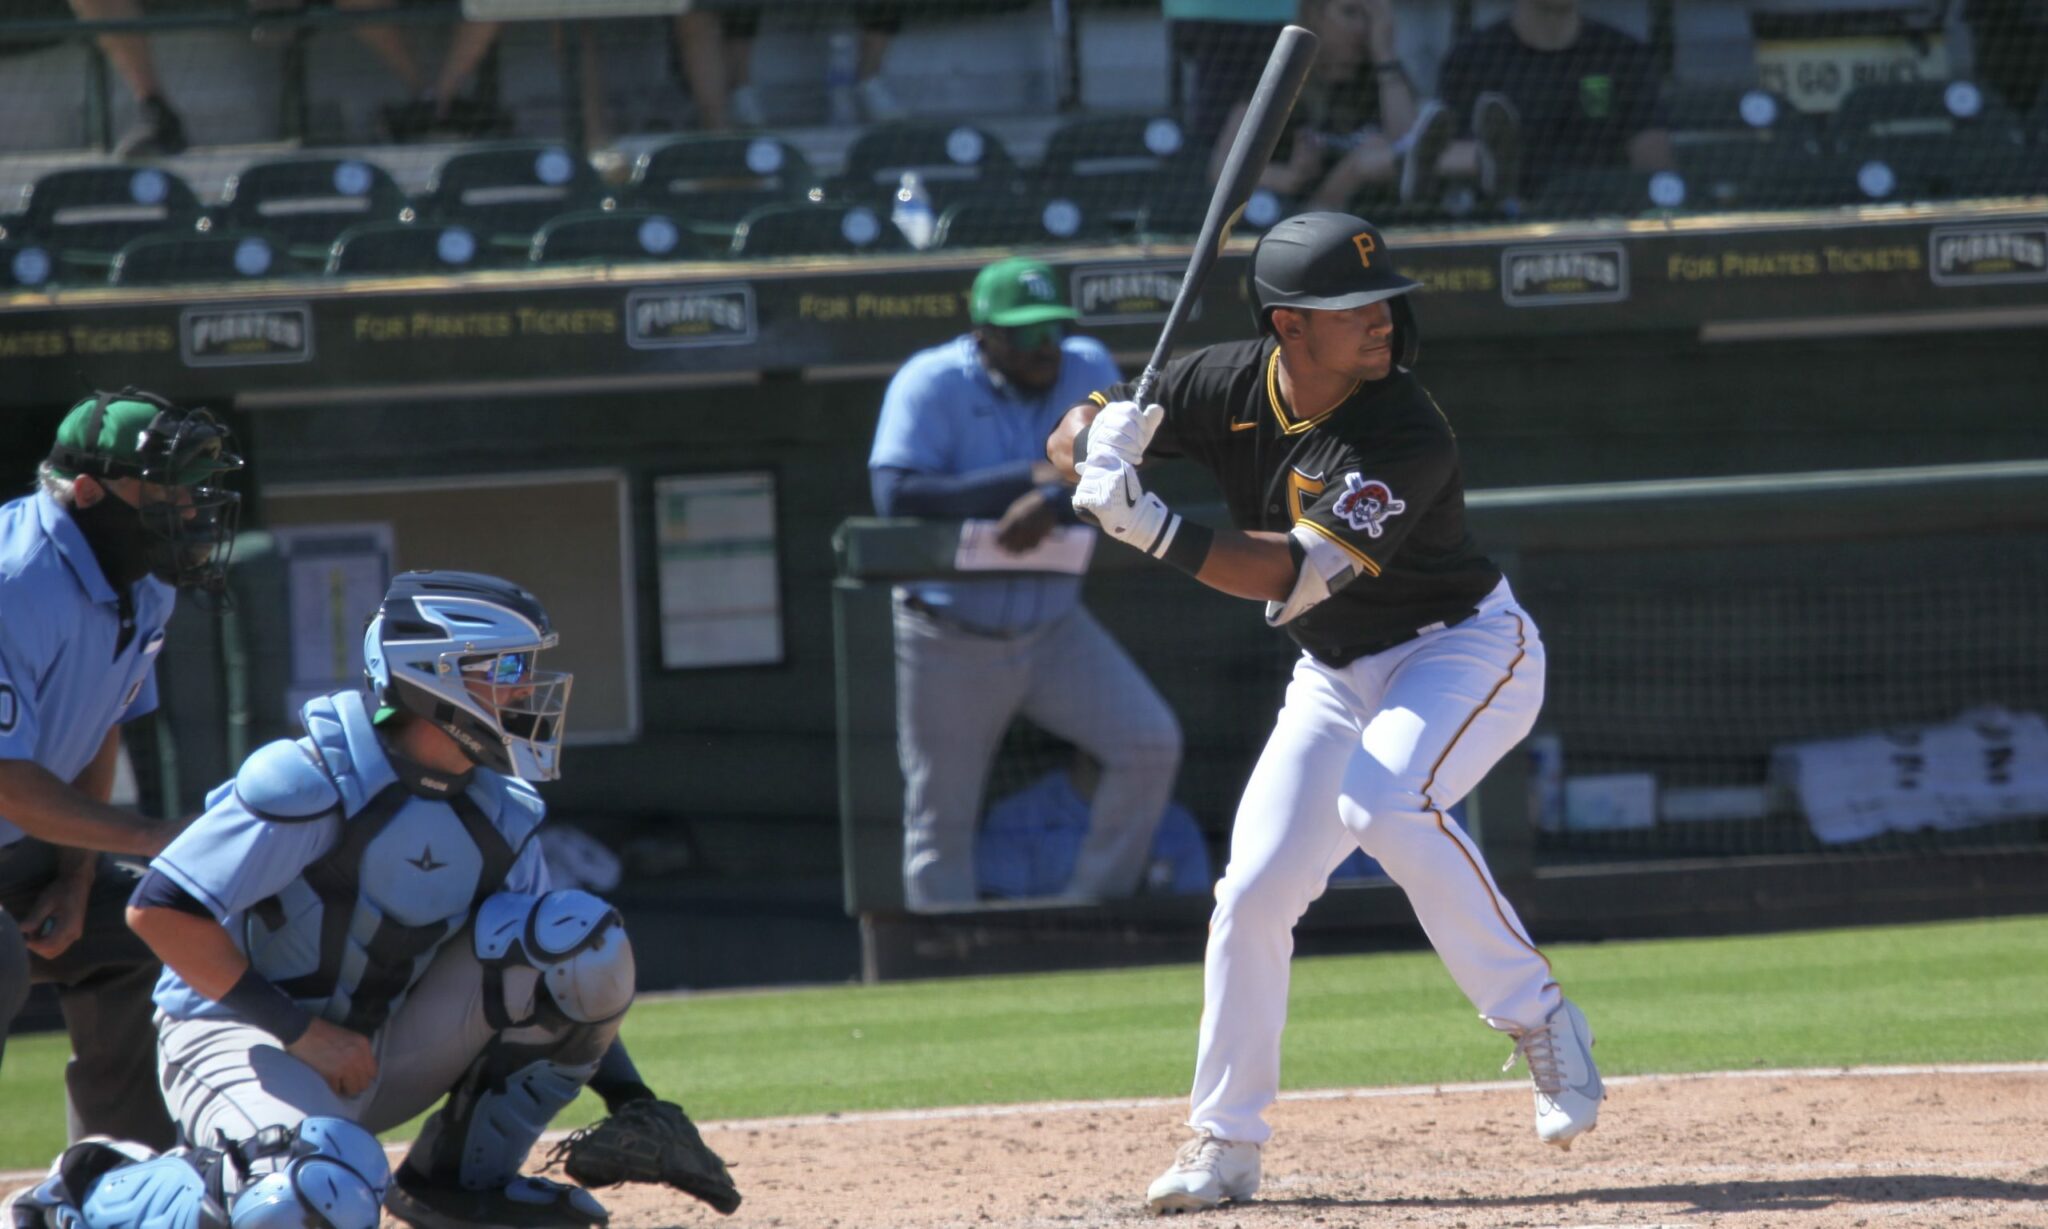 AFL Recap: Big Game for Nick Gonzales as Peoria Scores 16 Runs for the Narrow Victory